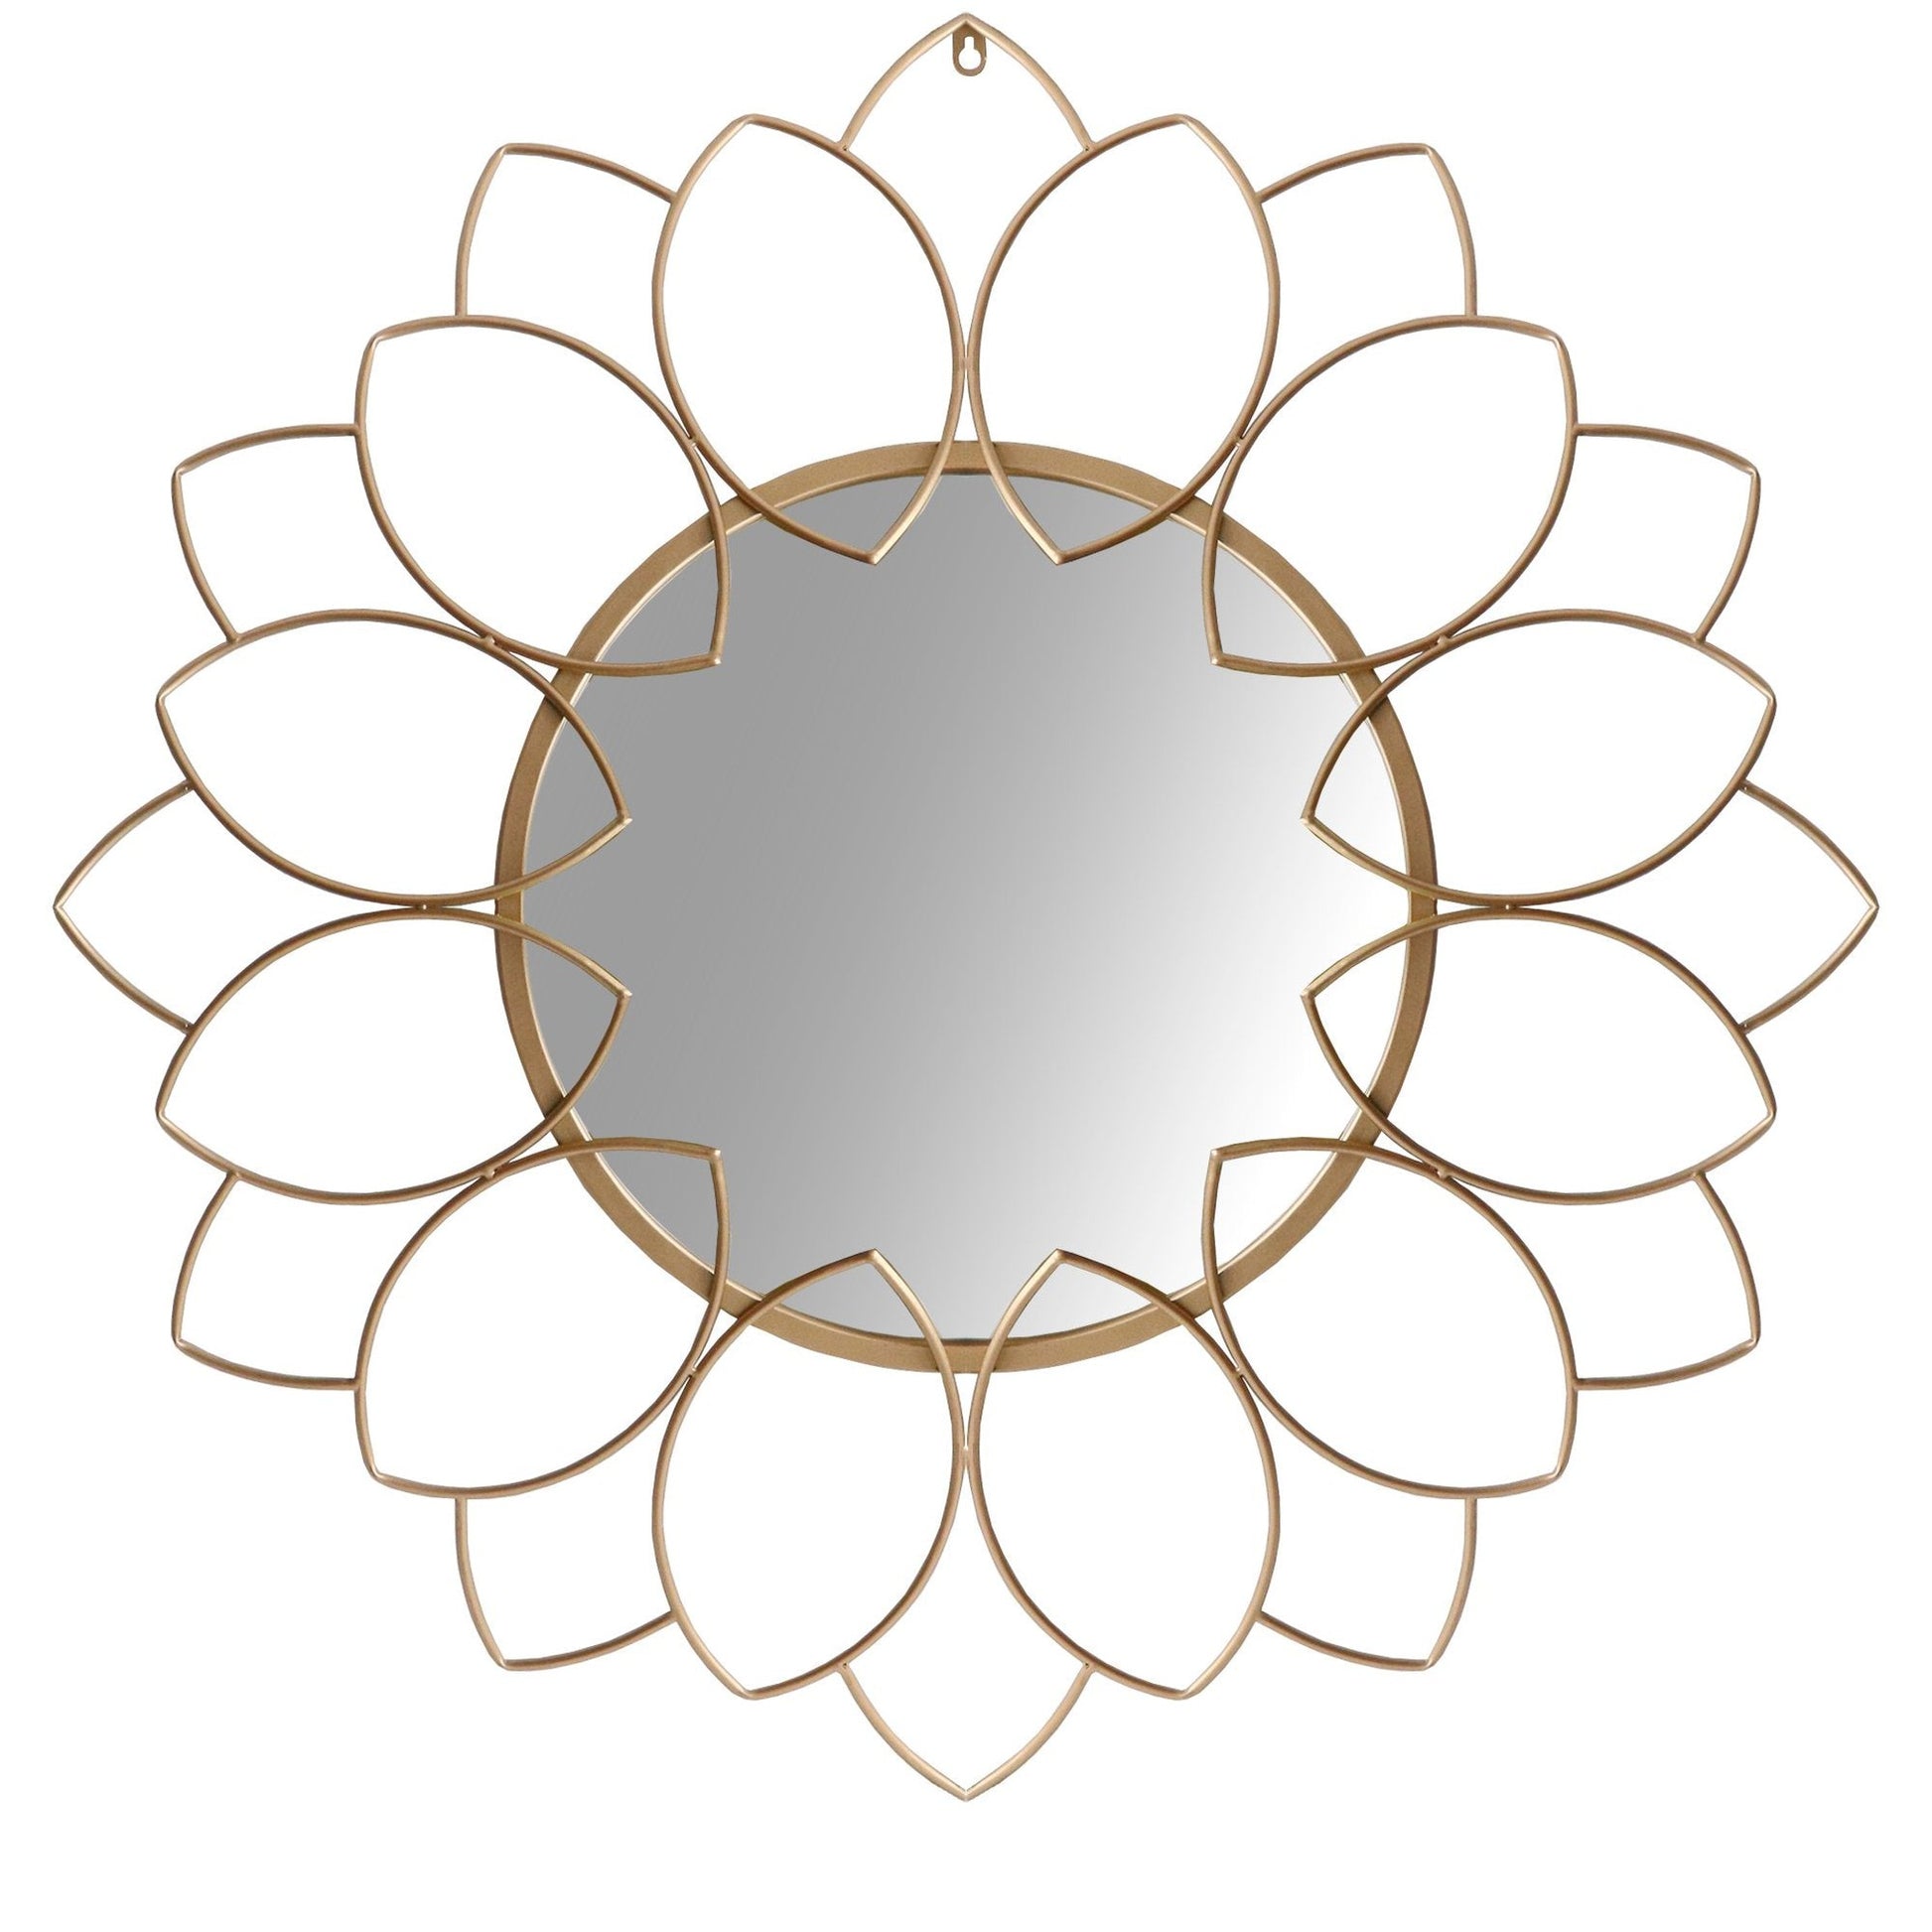 Benzara 34" Round Brown and Gold Metal Decor Wall Mirror With Oval Motif